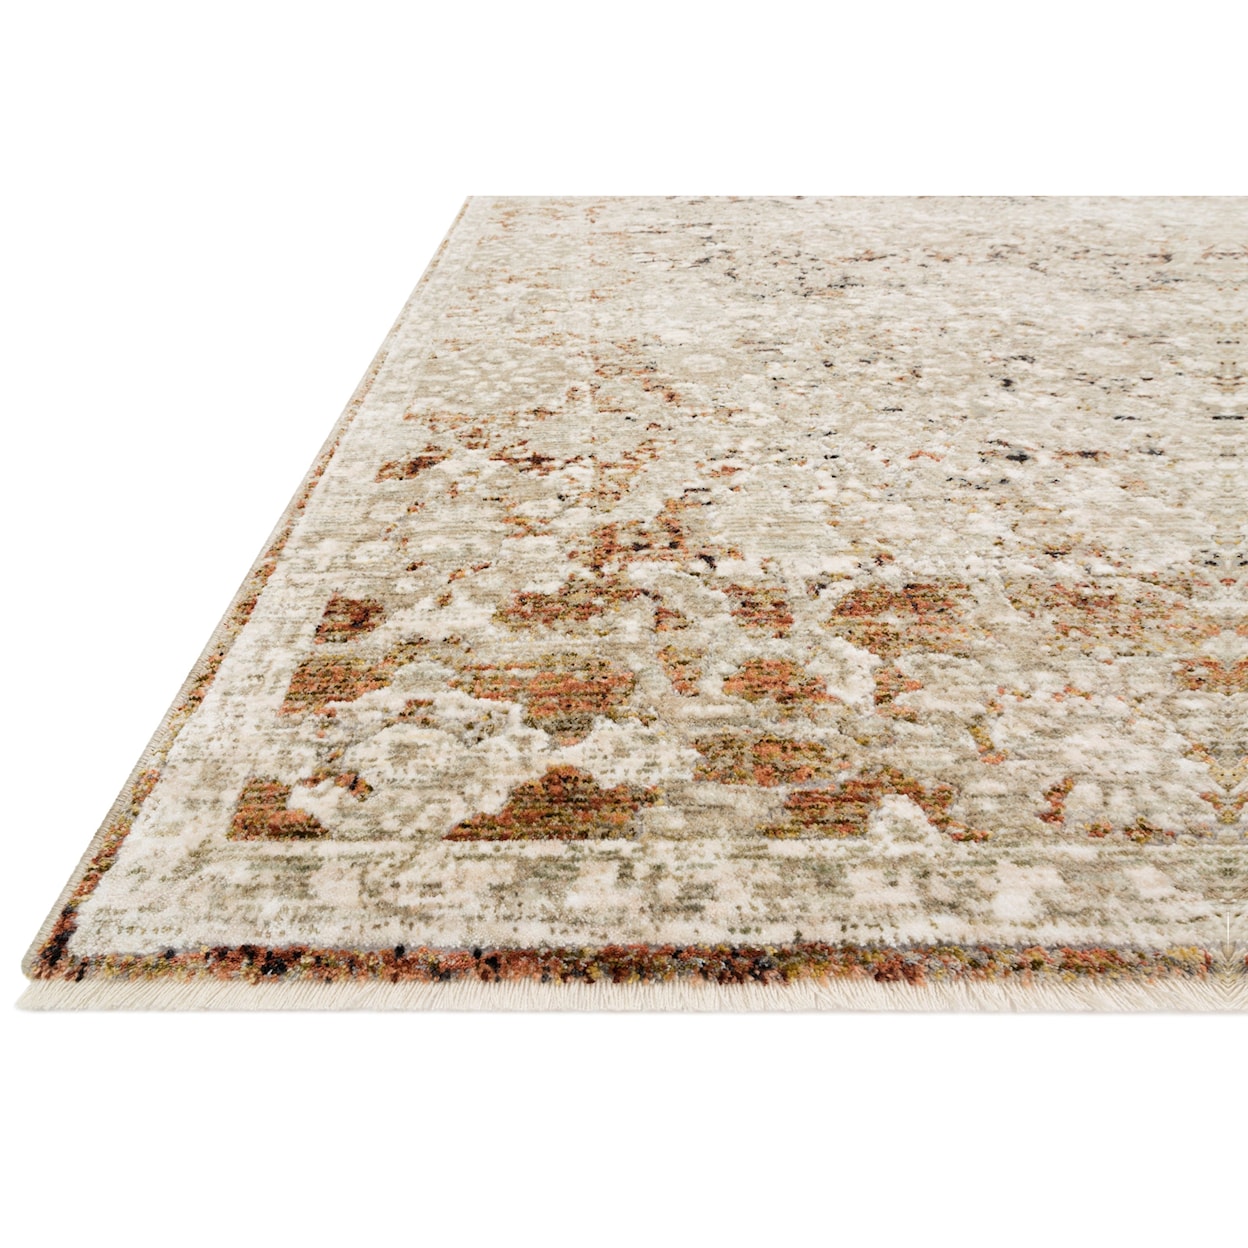 Reeds Rugs Theia 2'10" x 8' Natural / Rust Rug